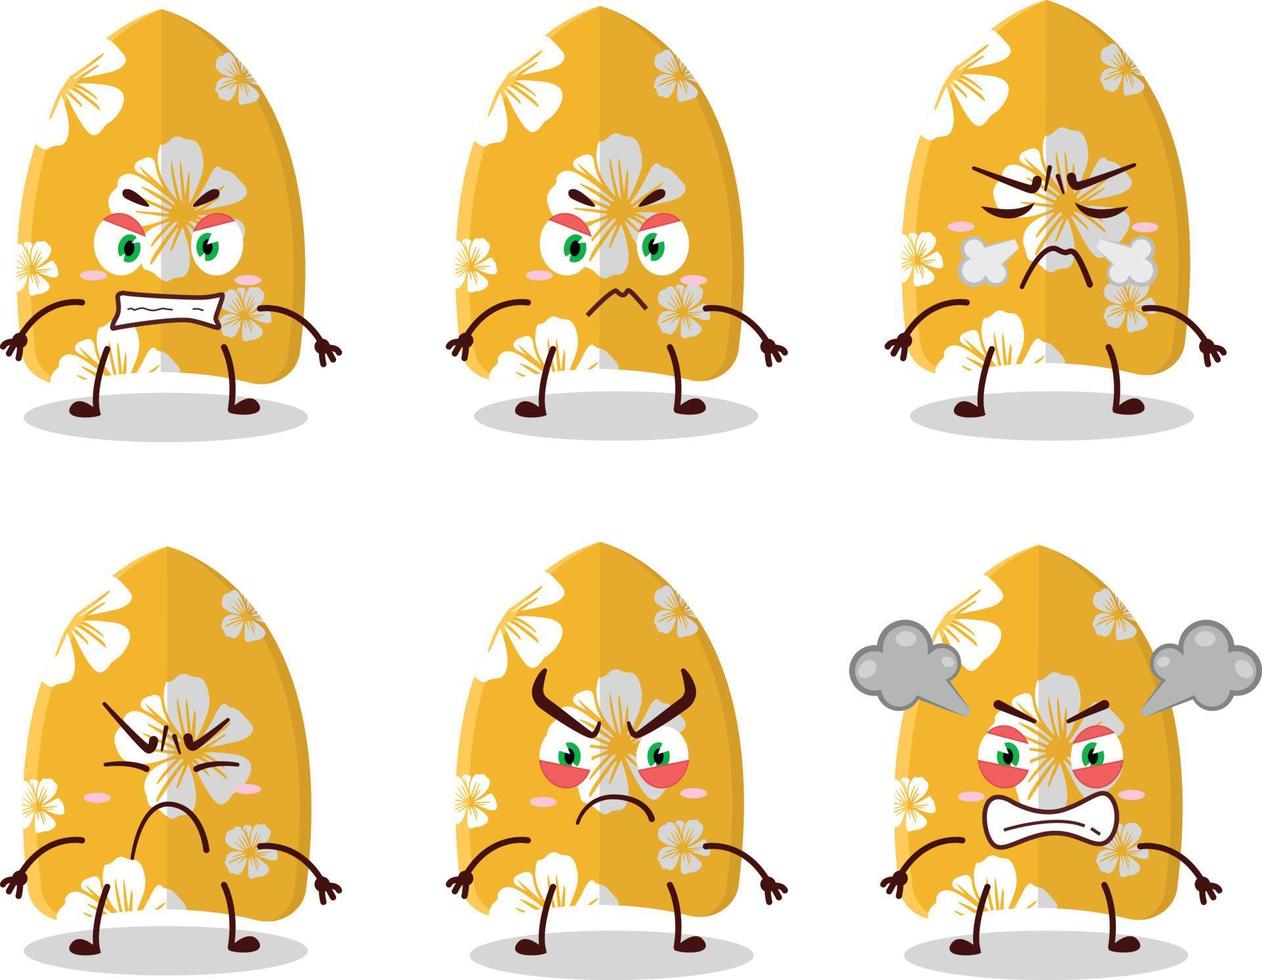 Surfing board cartoon character with various angry expressions vector